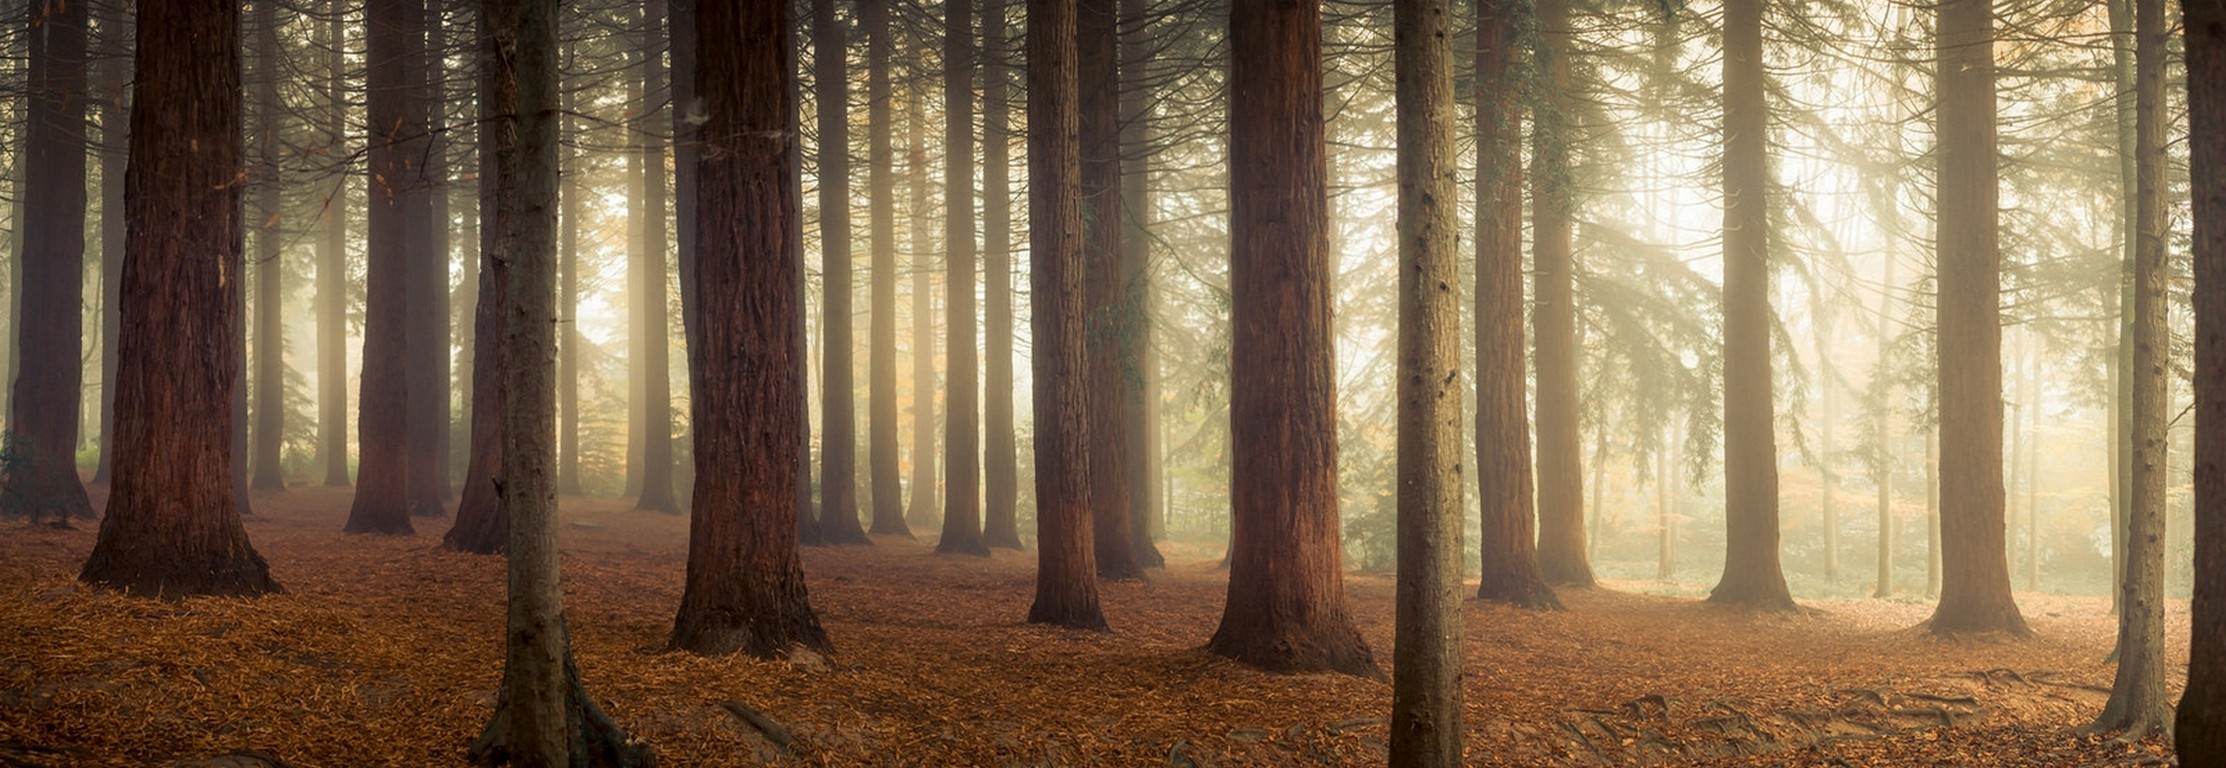 General 2226x768 trees mist forest nature